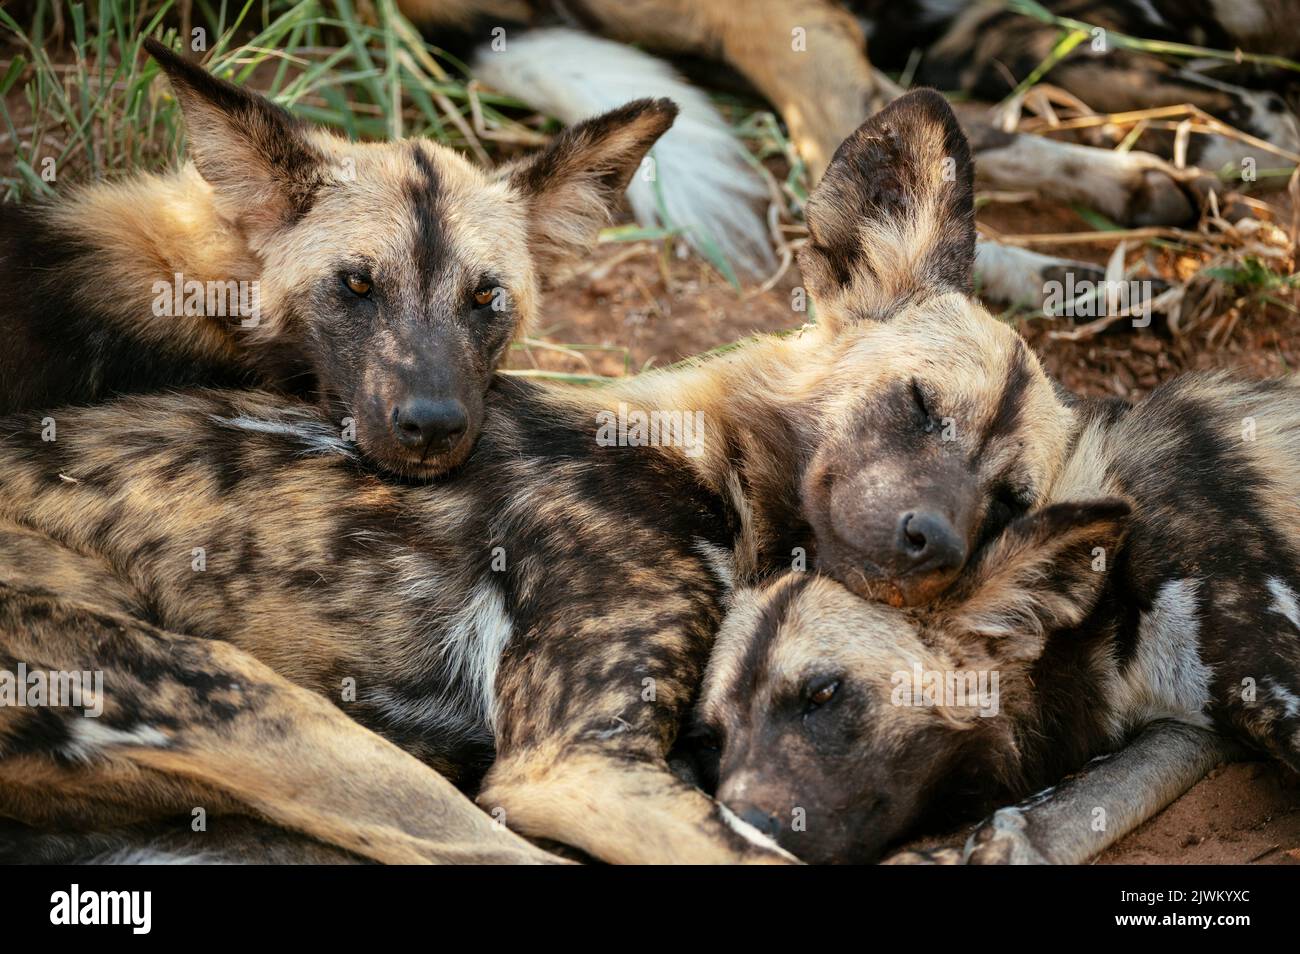 African Wild Dogs (Painted Wolves), Timbavati Private Nature Reserve Reserve, Kruger National Park, South Africa Stock Photo